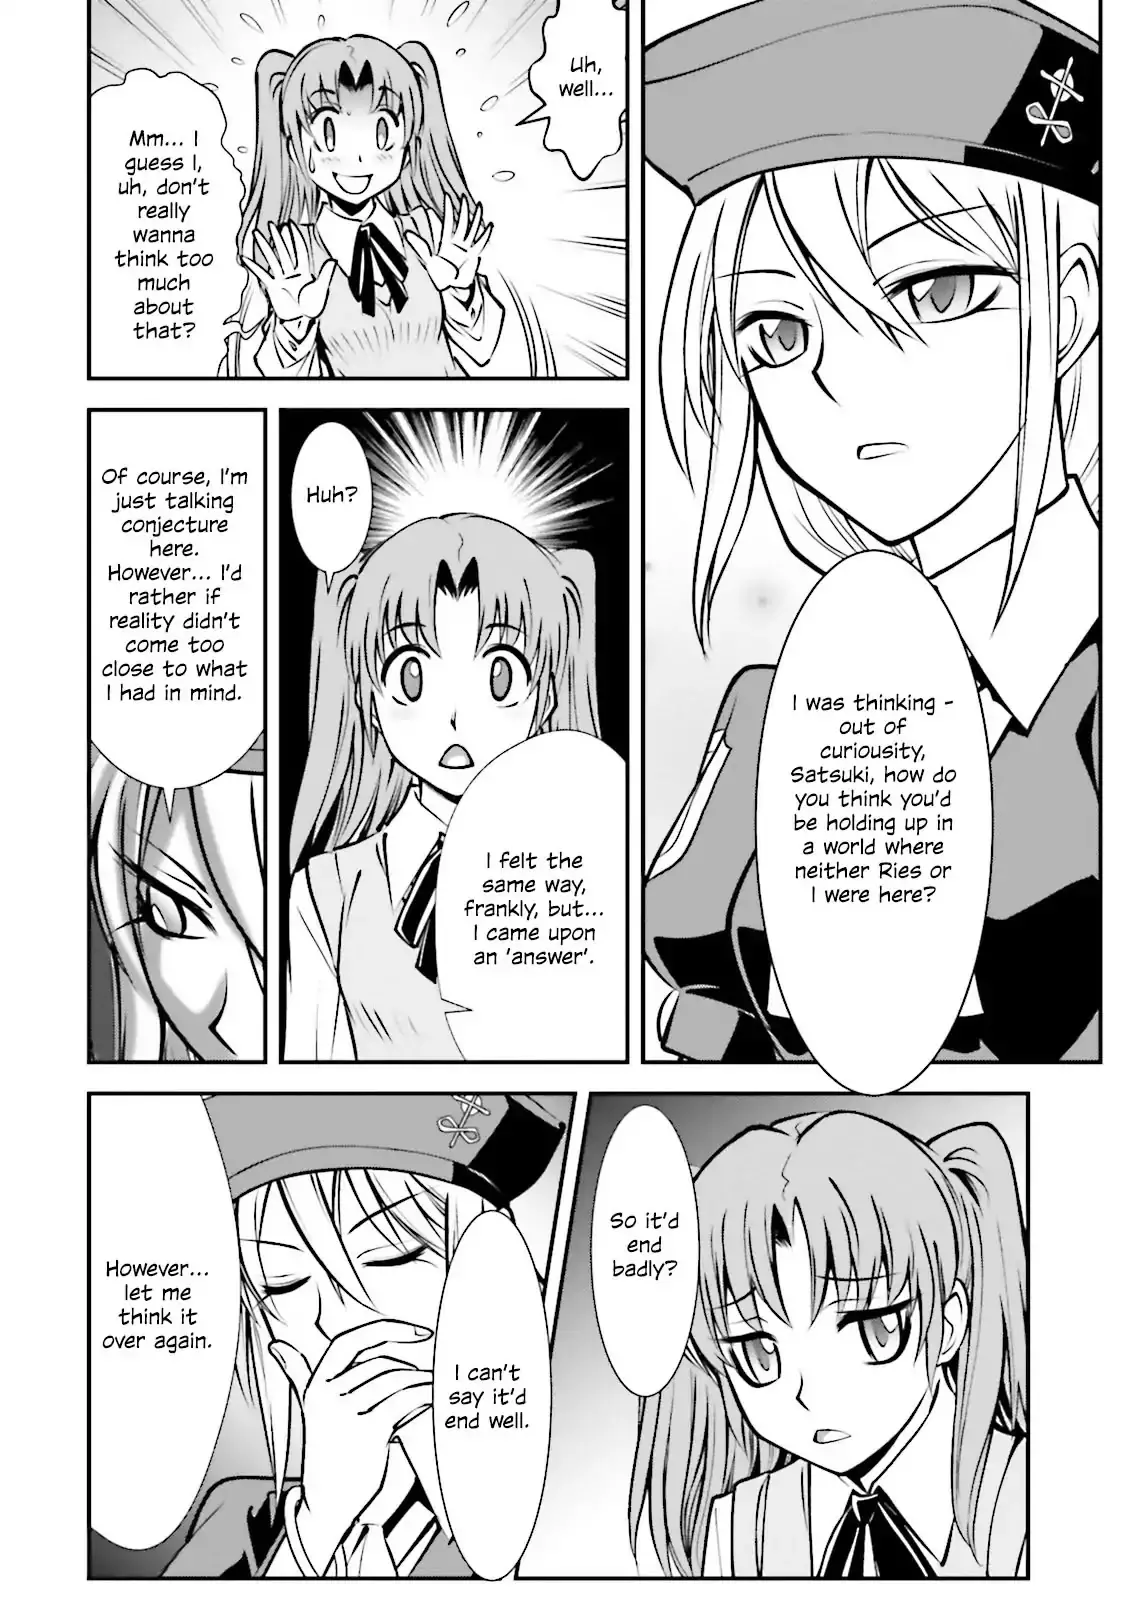 Melty Blood - Back Alley Alliance Nightmare - 2 page 8